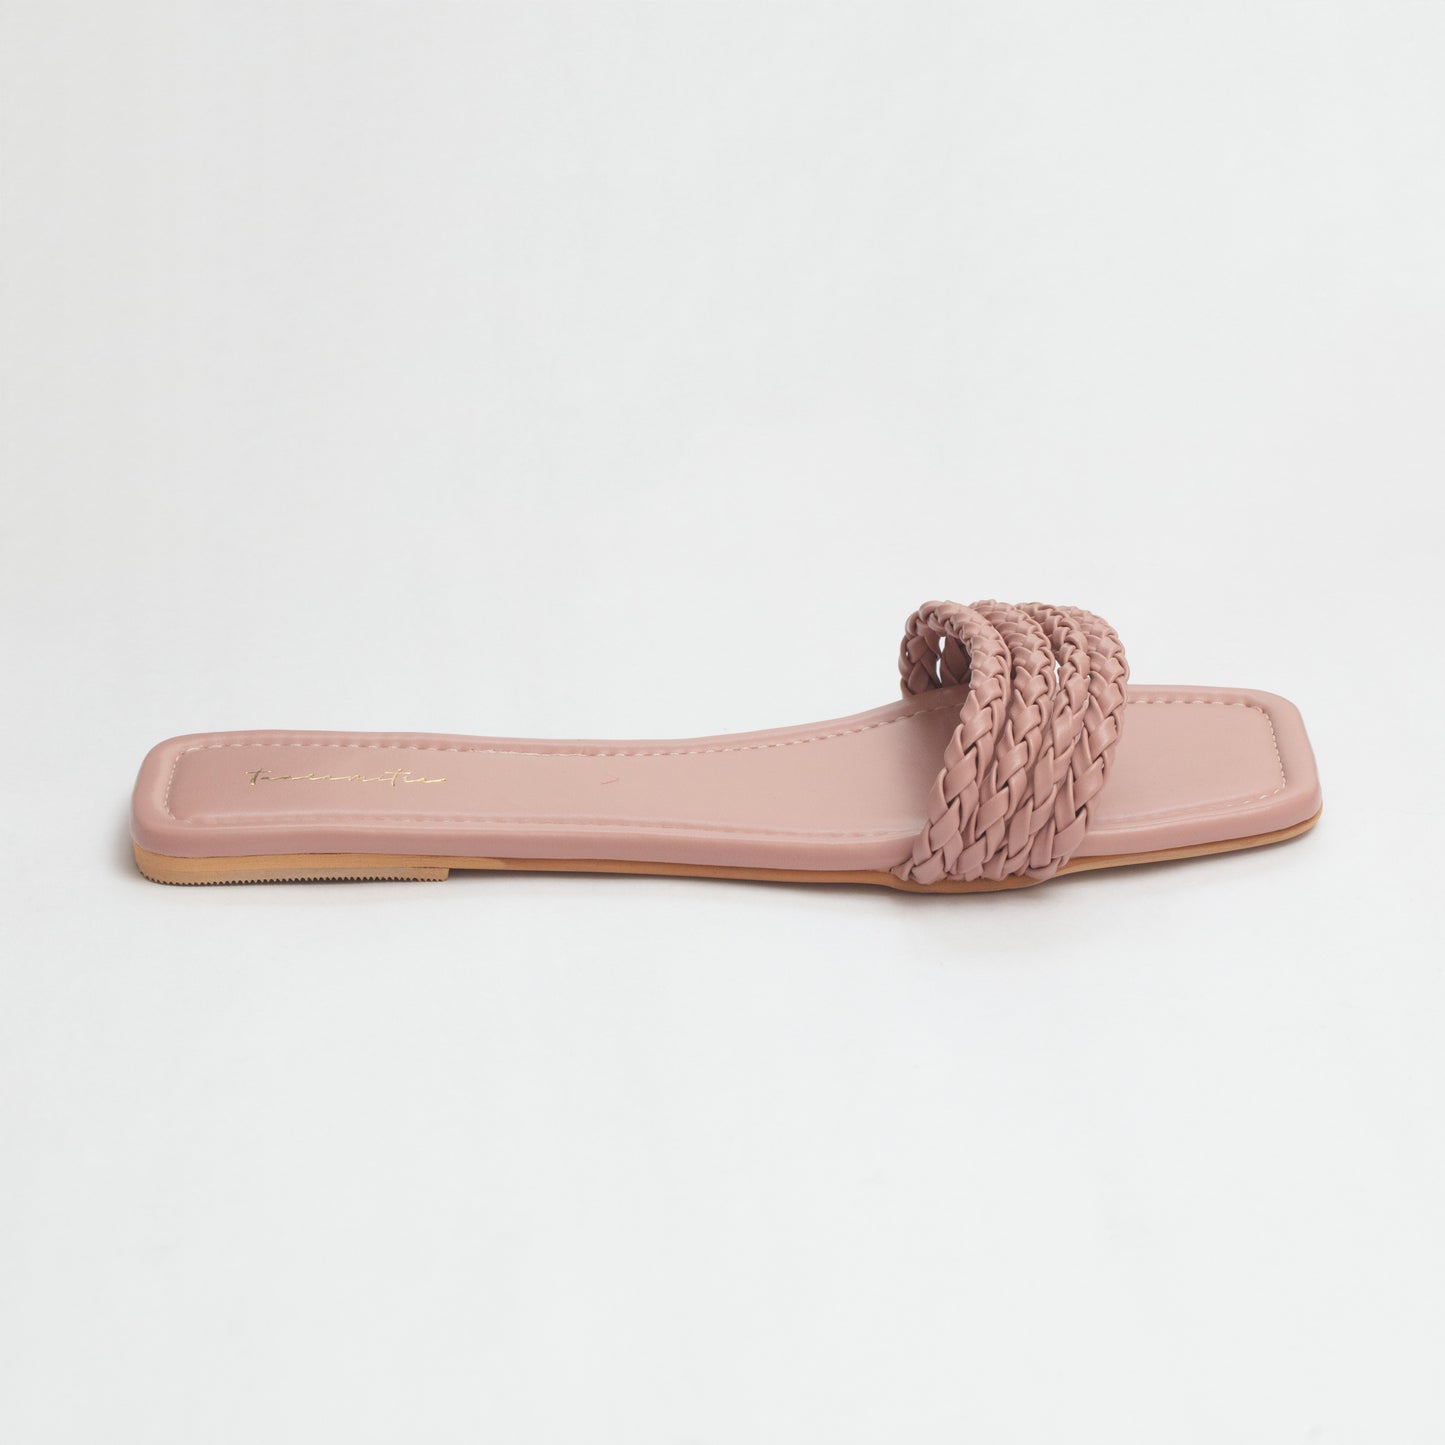 Halep strappy flats in Peach